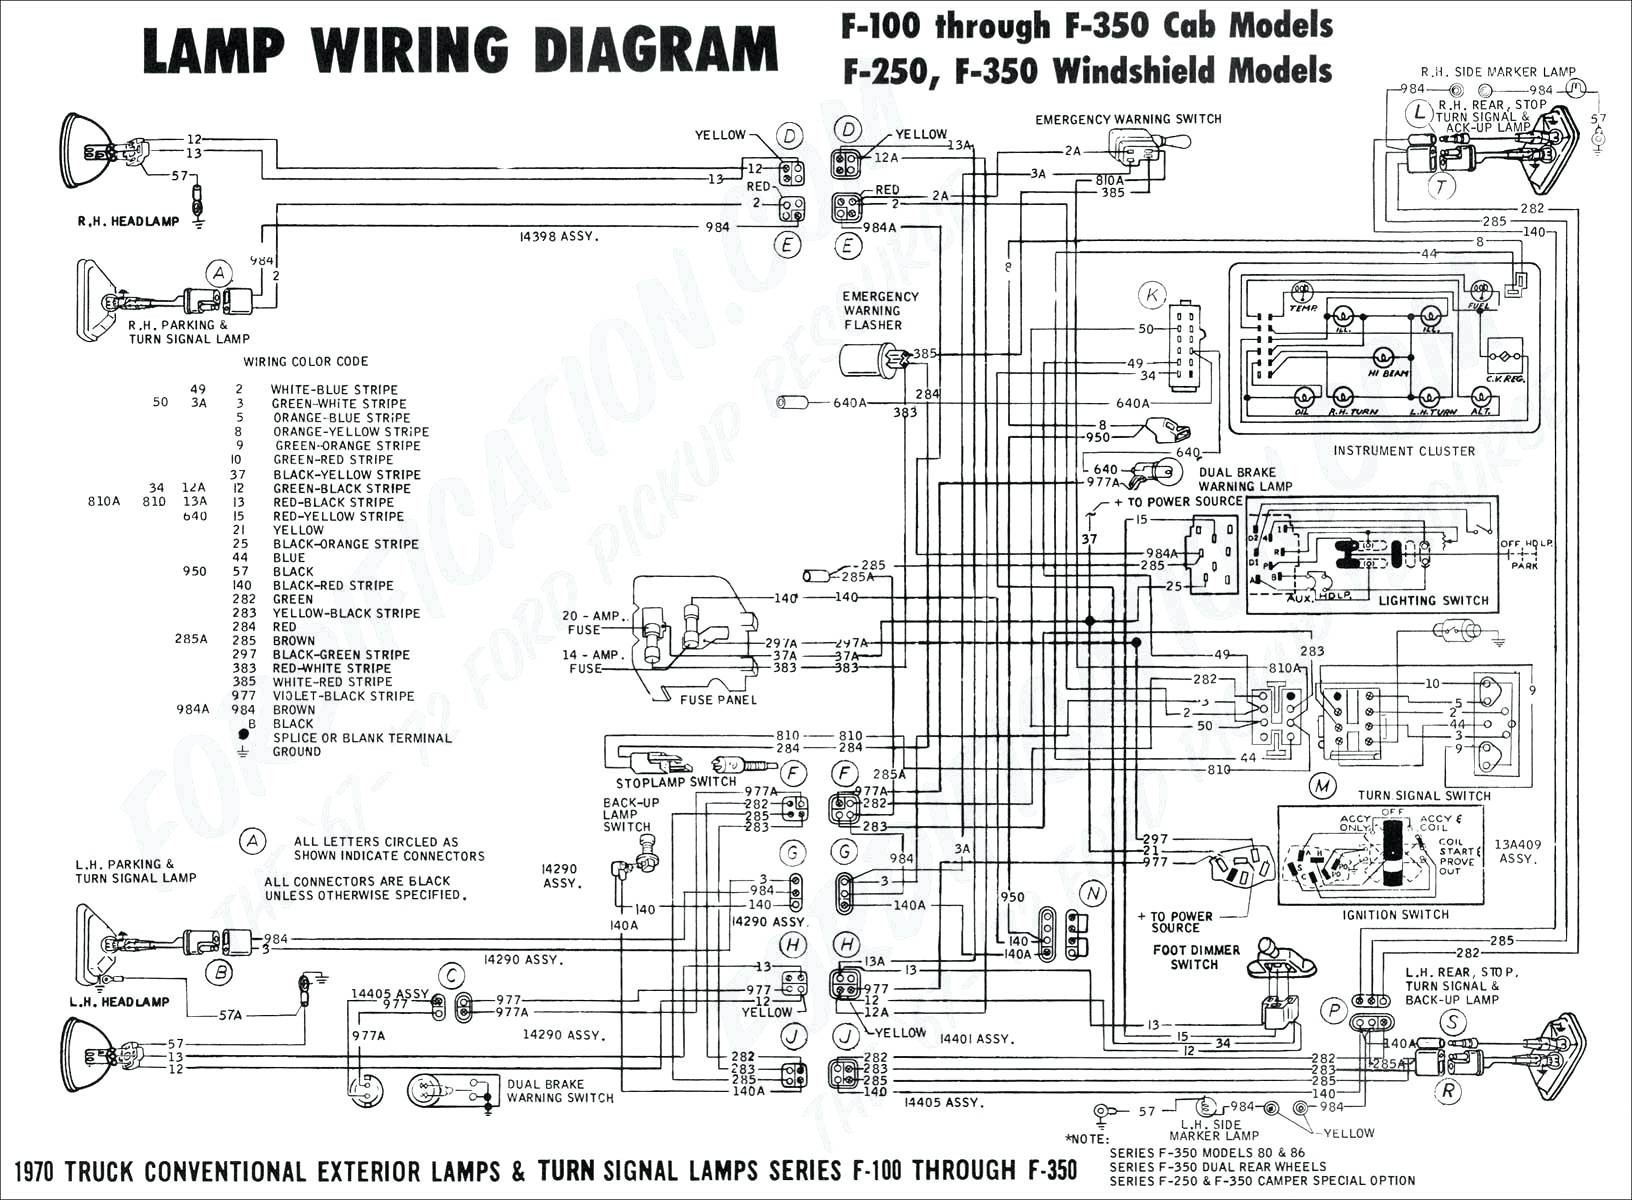 Wiring Diagram for Trailer Harness Valid F150 Trailer Wiring Diagram 2000 ford F250 Trailer Wiring